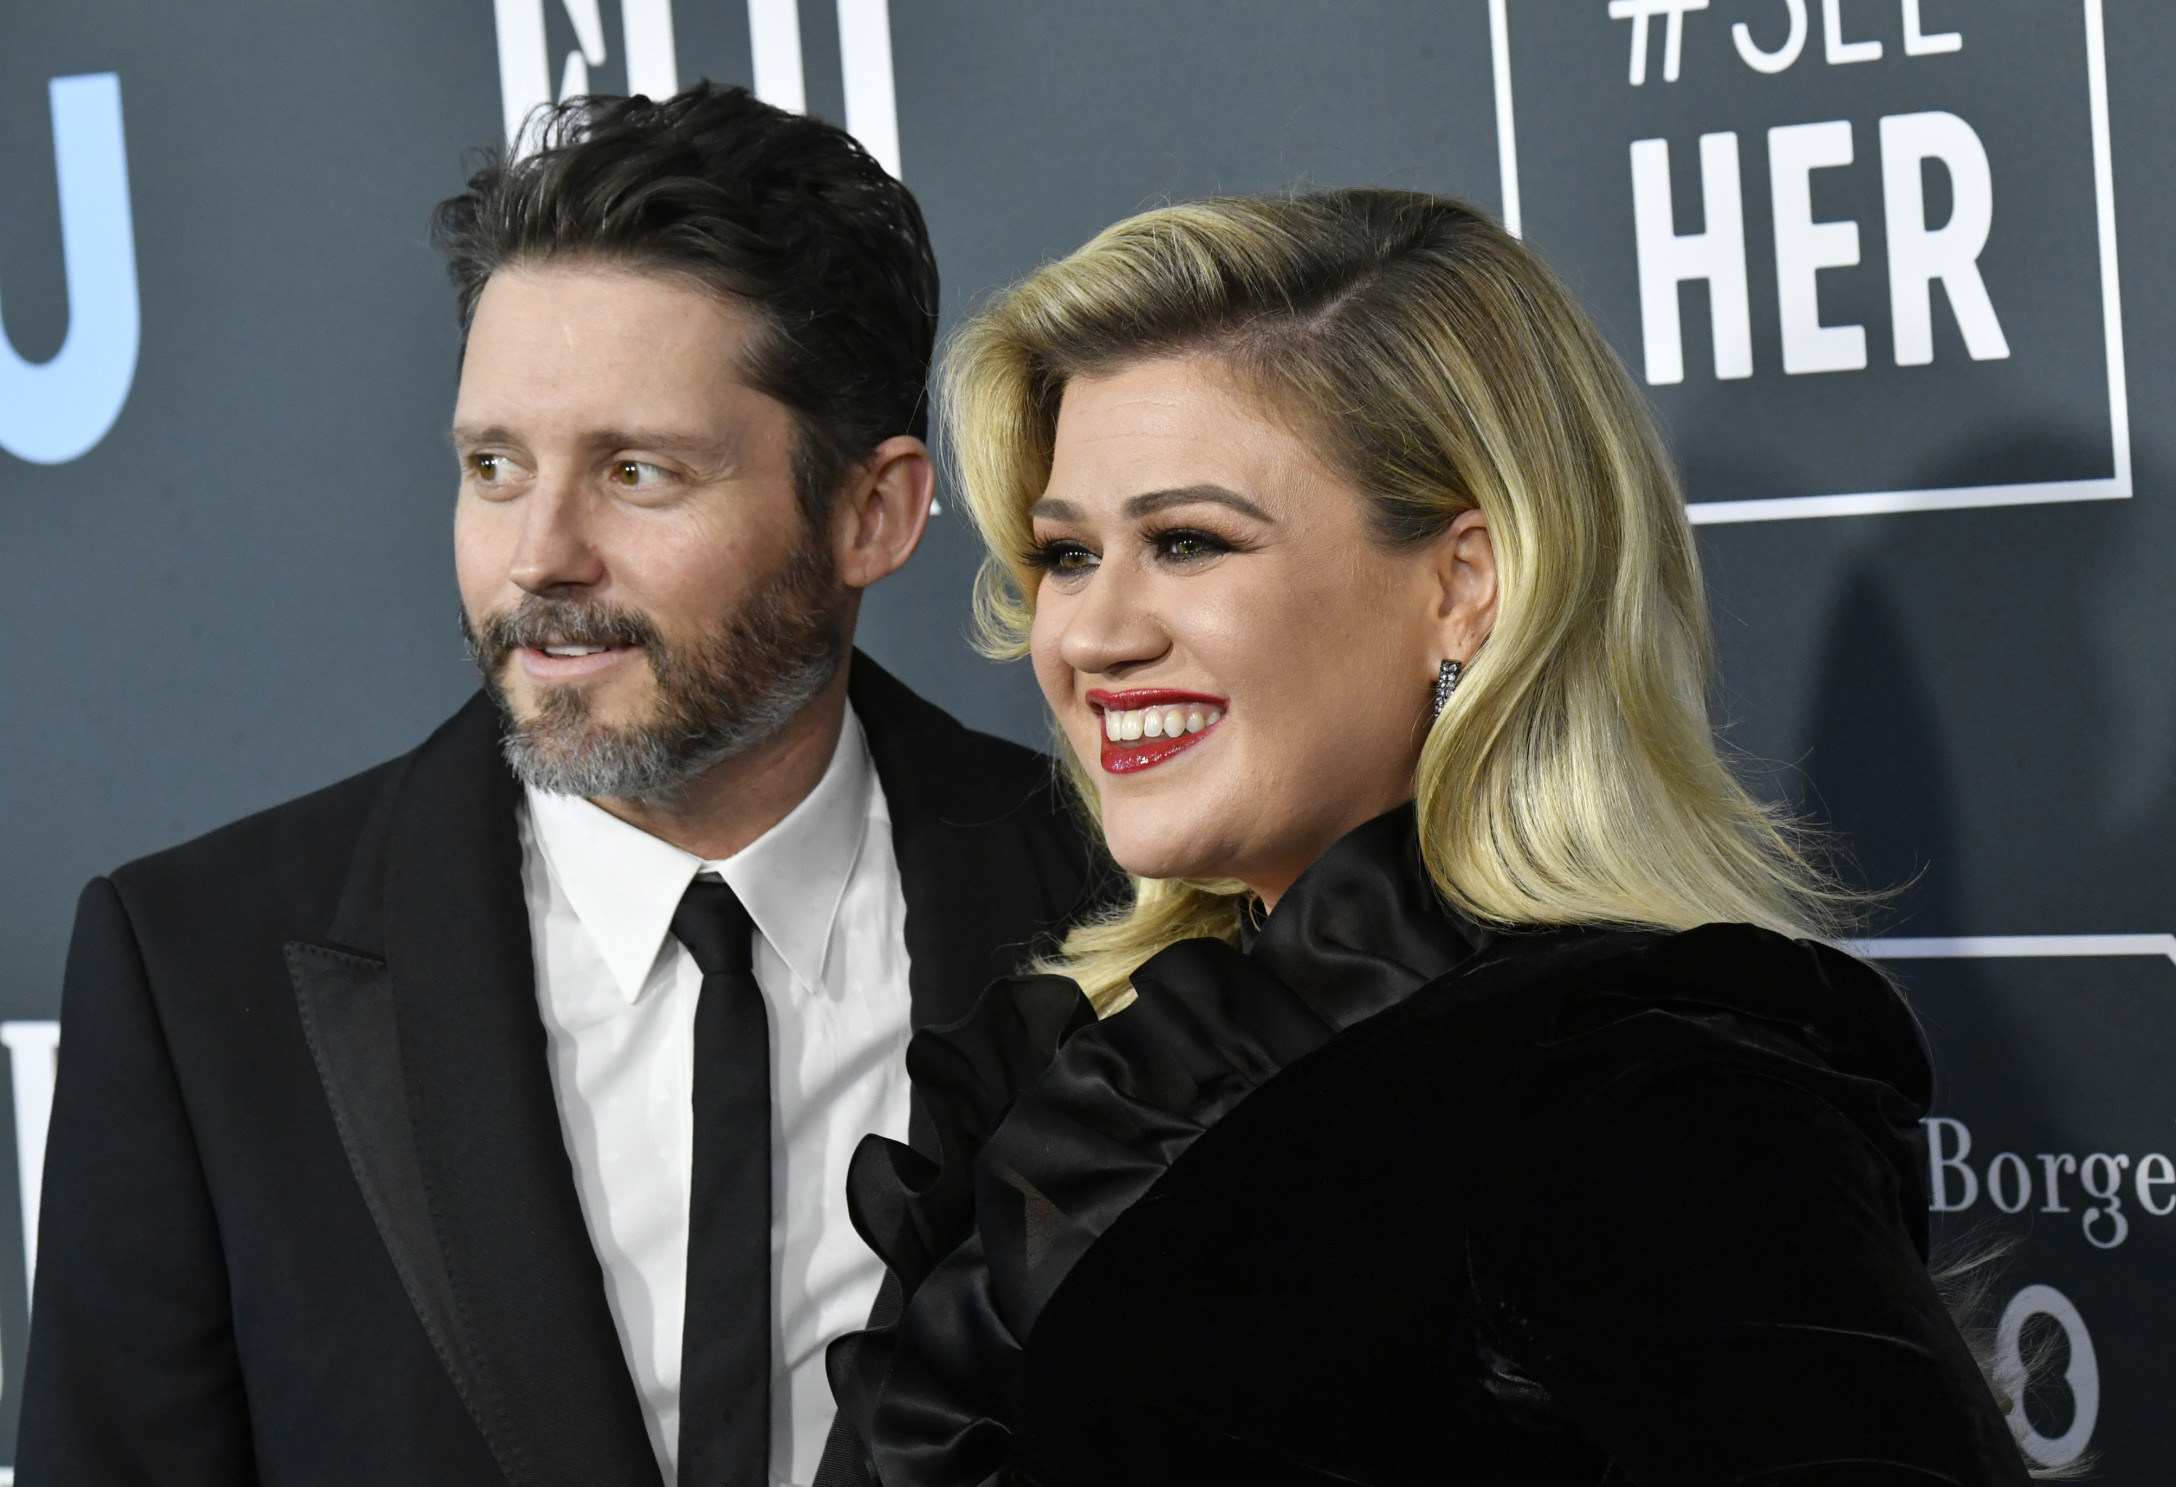 Kelly Clarkson Was Ordered to Pay Her Ex 200K a Month and People